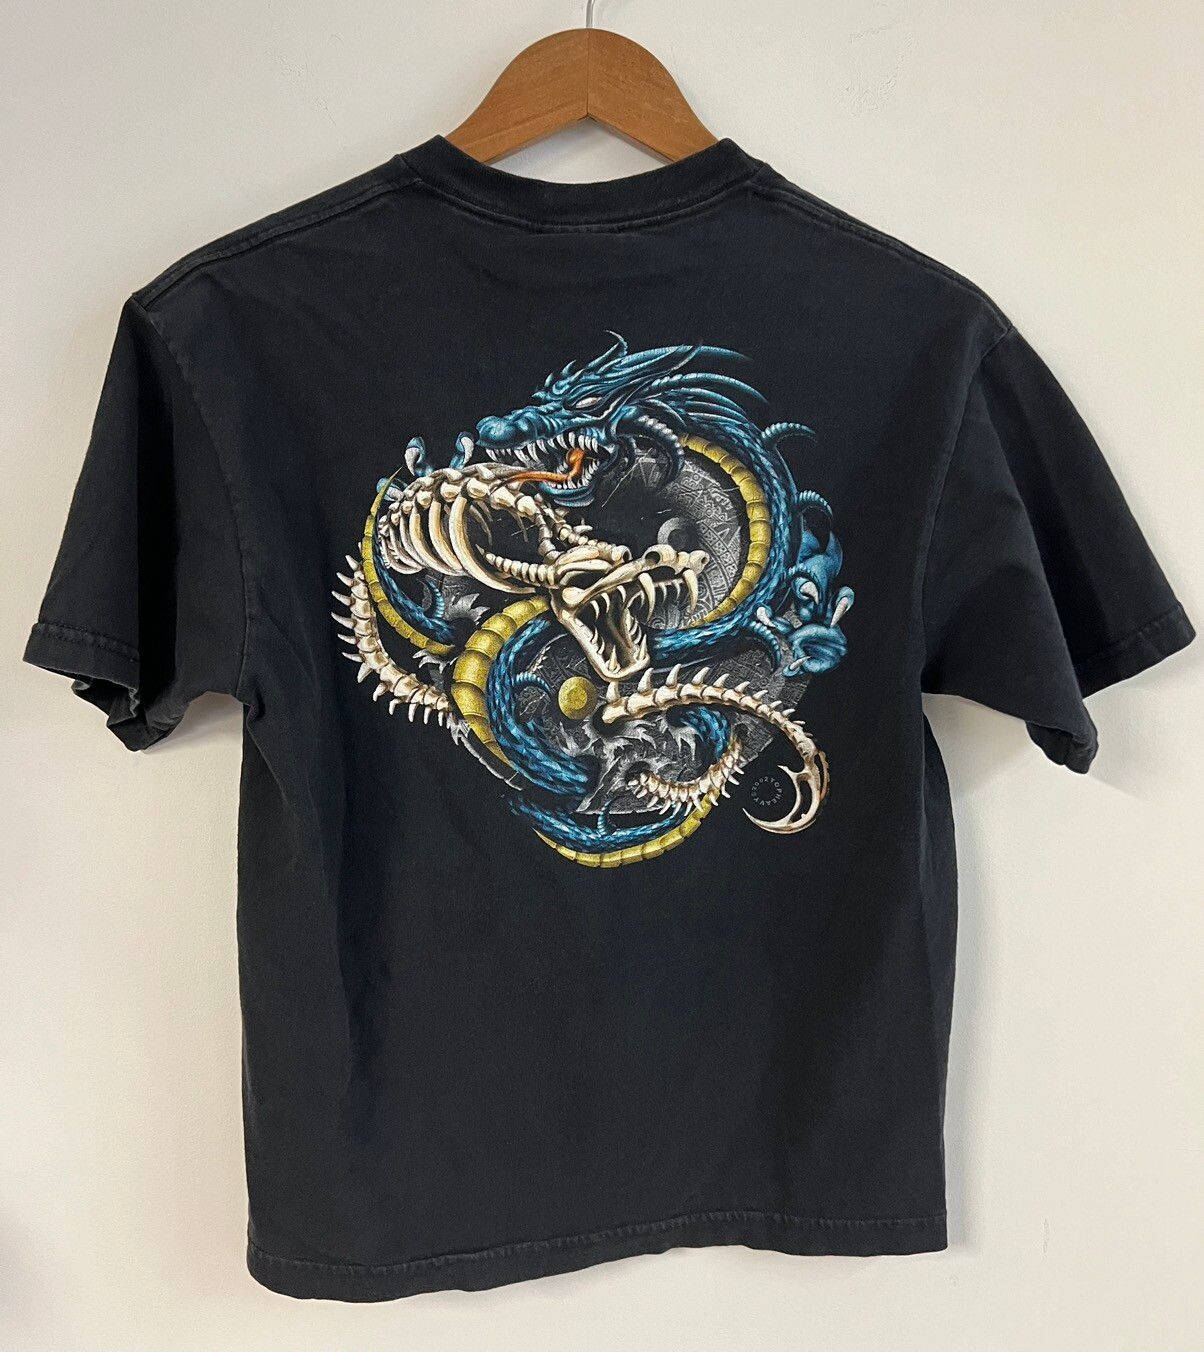 Vintage VTG Top Heavy Ying Yang Double Dragon JNCO Style T-Shirt Size US M / EU 48-50 / 2 - 1 Preview